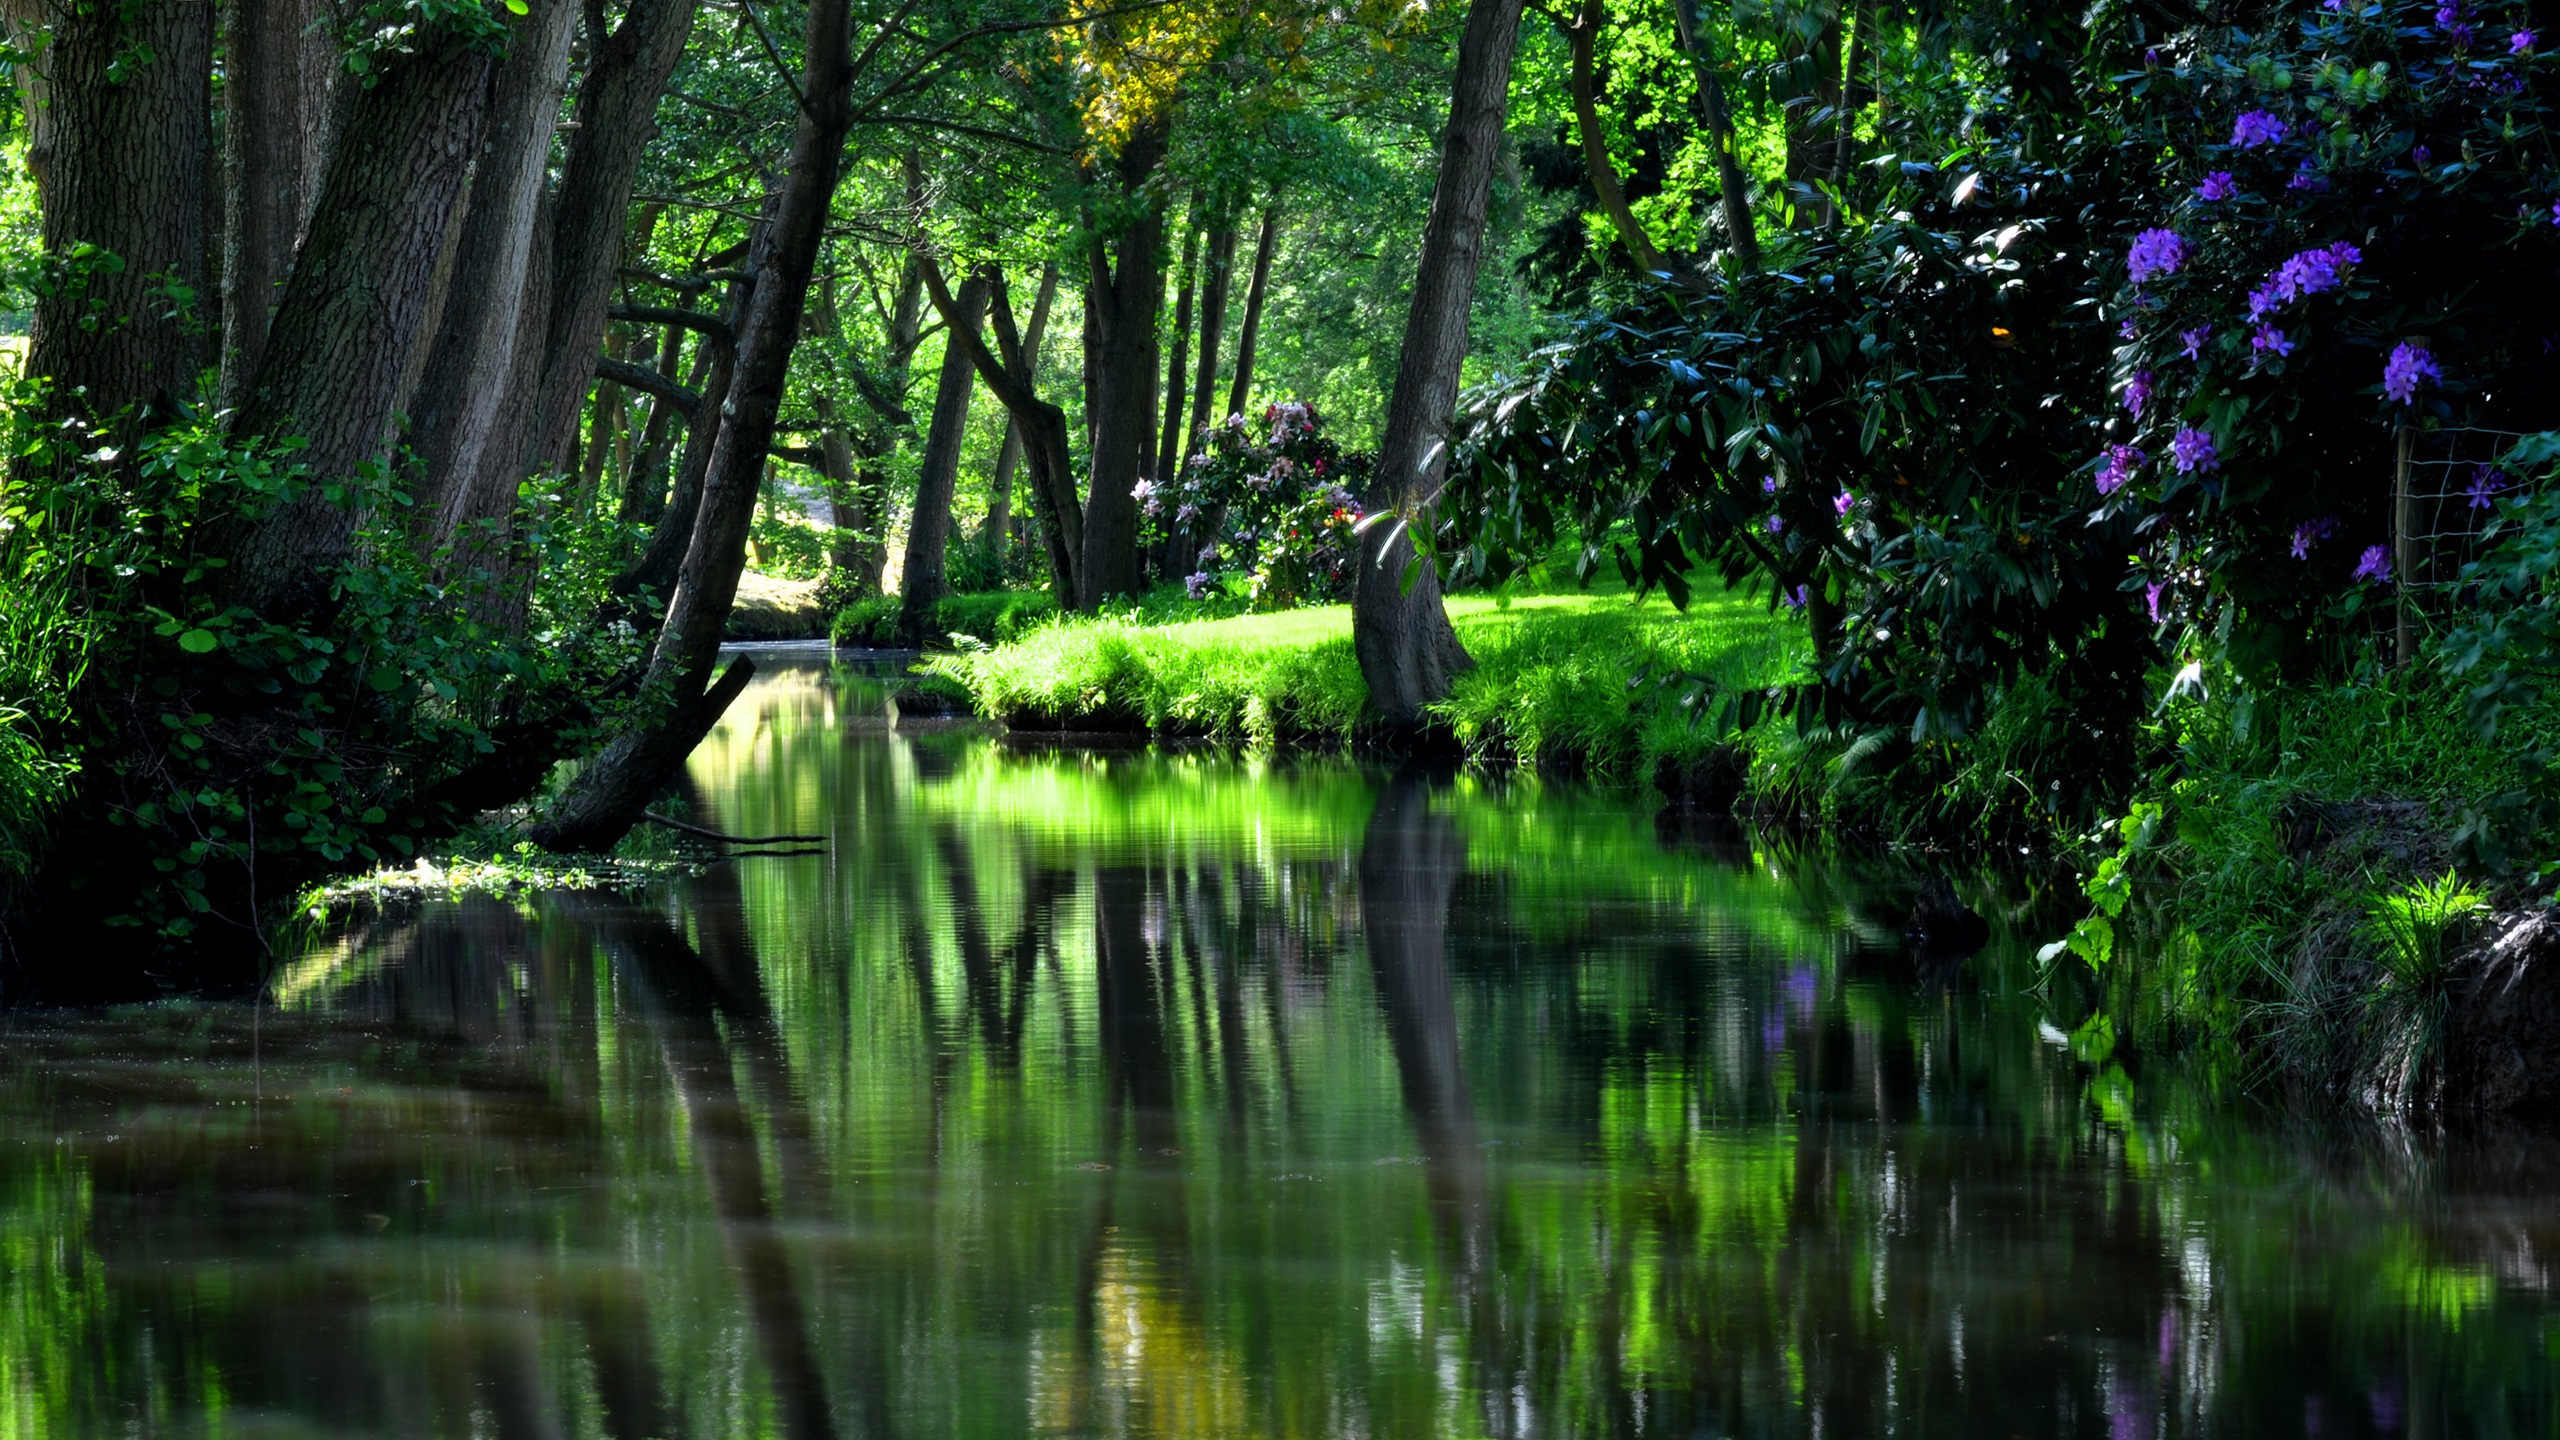 General 2560x1440 river water trees grass plants nature sunlight